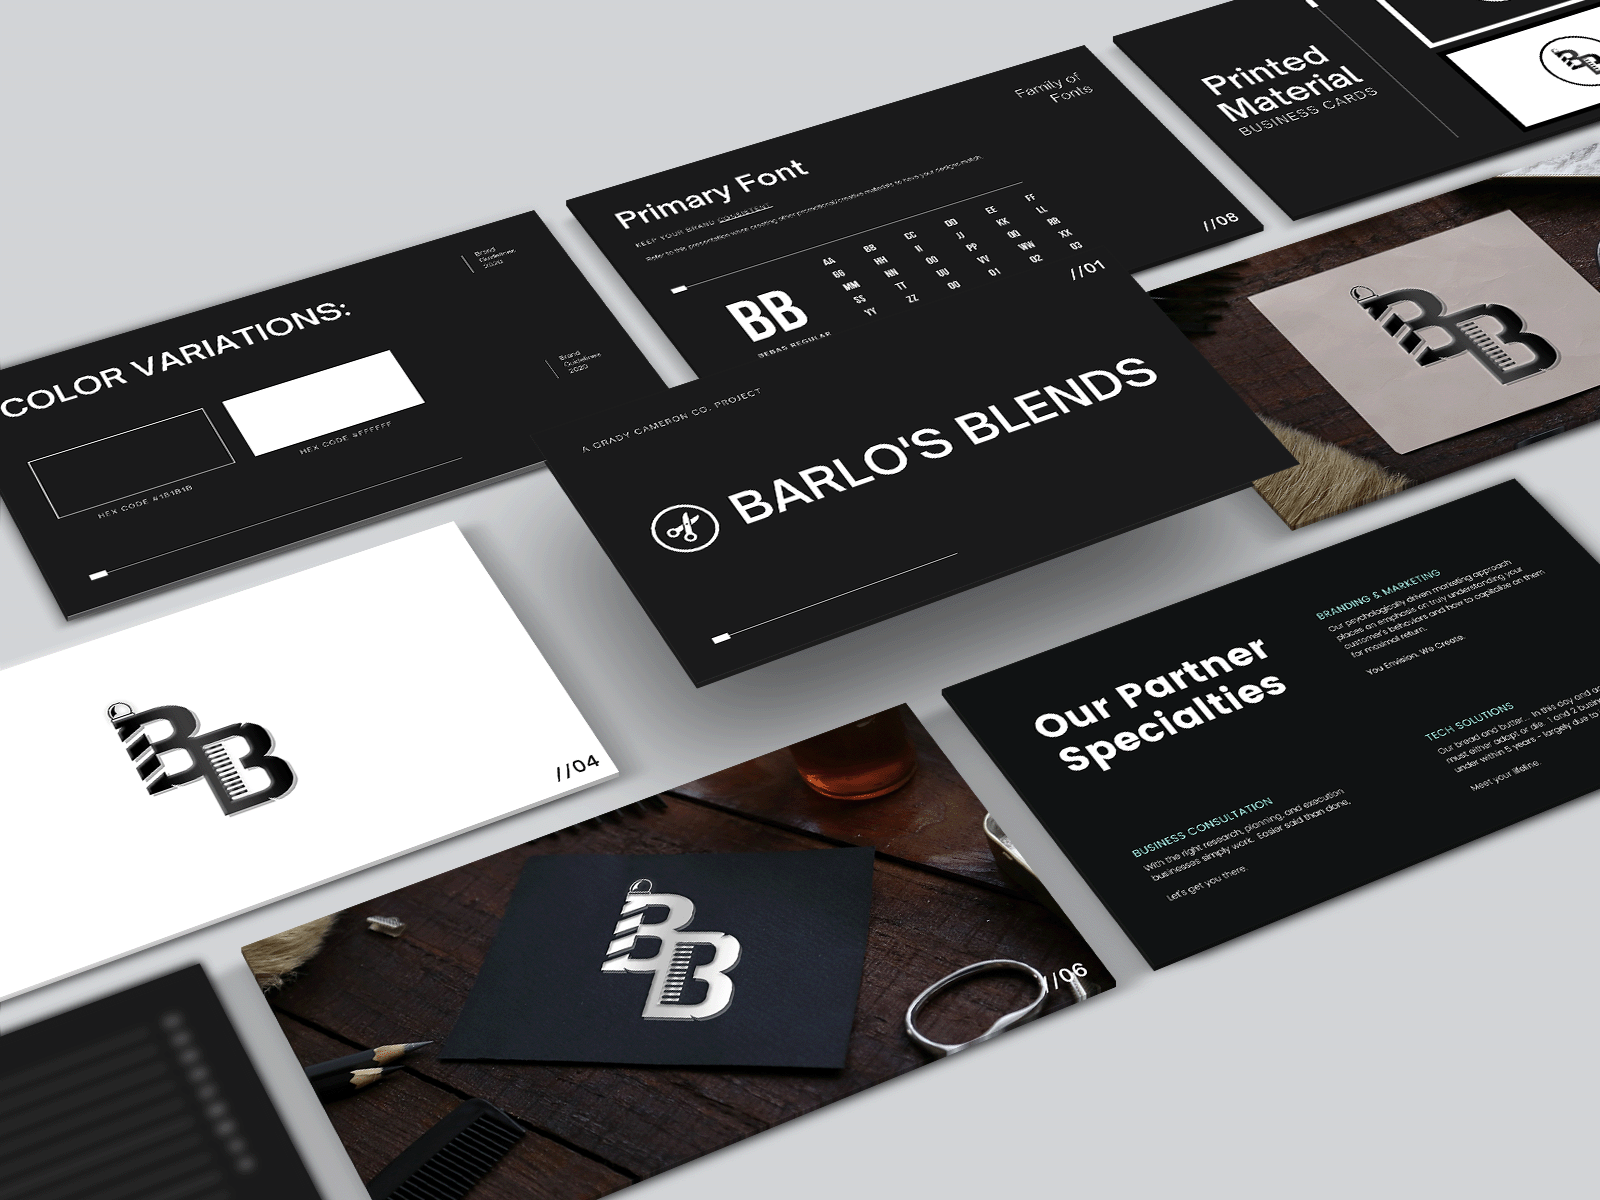 Barlo's Blends Pitch Deck brand identity brand identity design branding cover design download flat infographic mockup paper photoshop pitch pitchdeck poster powerpoint print template typography ui ux